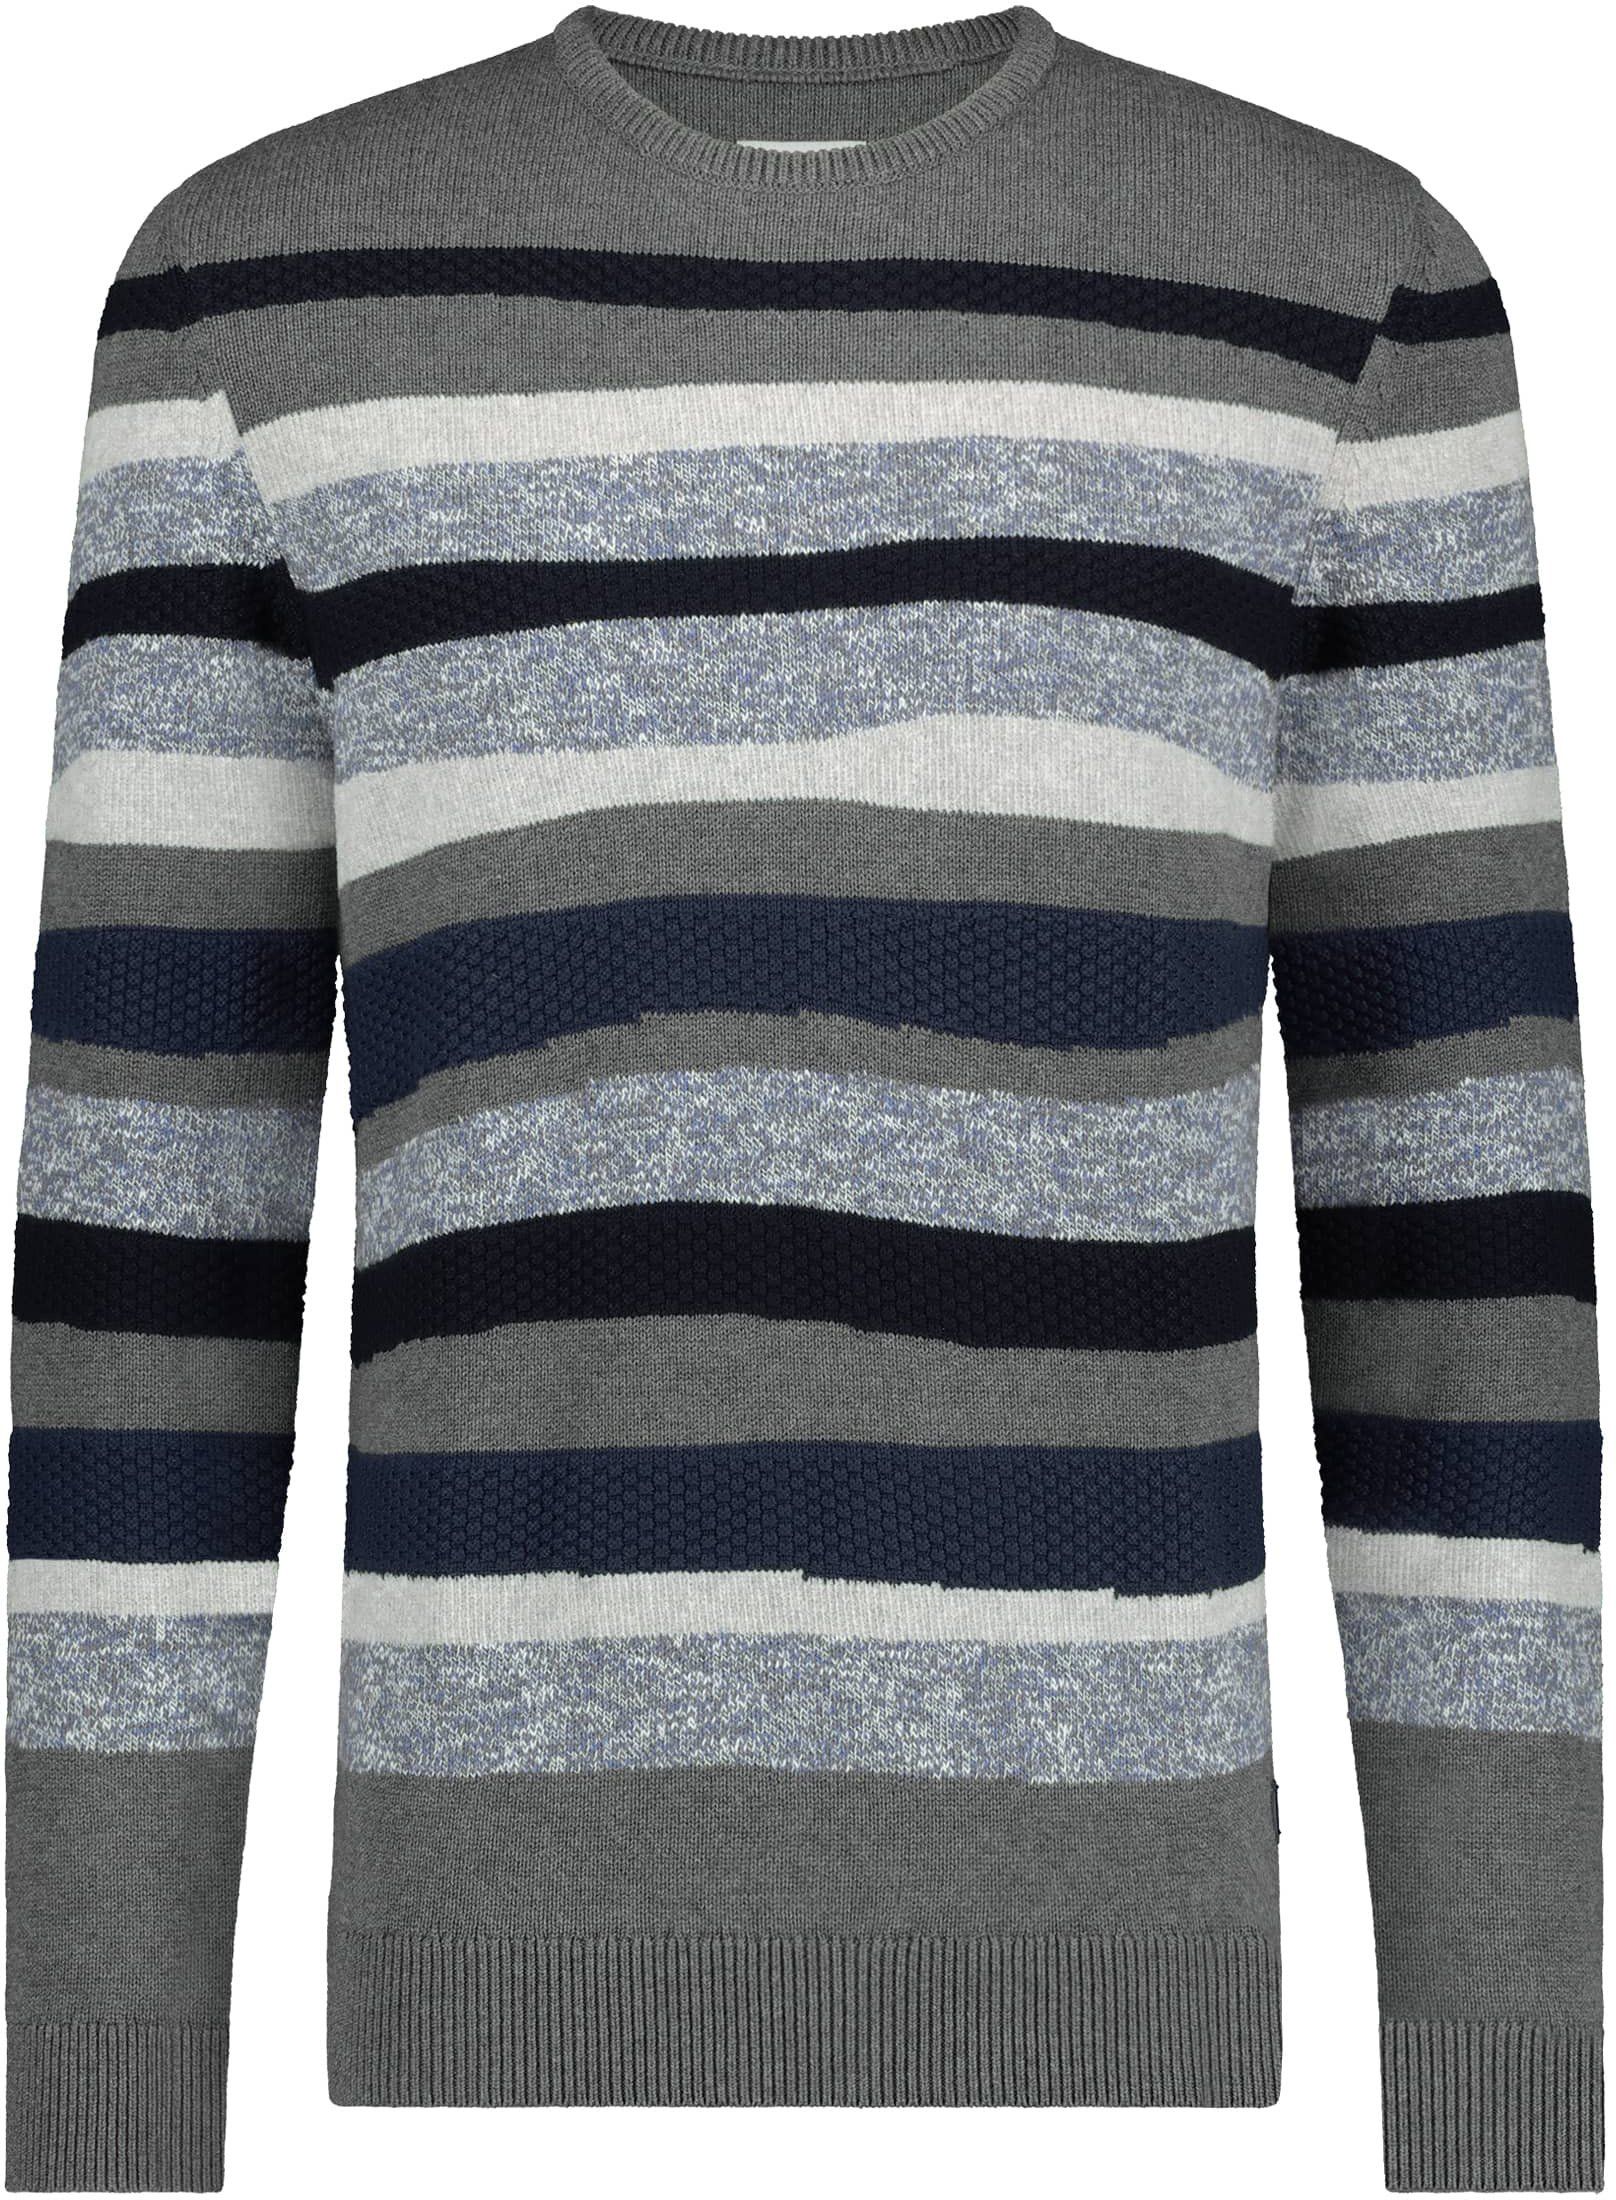 State Of Art Jacquard Pullover Stripe Grey size 3XL